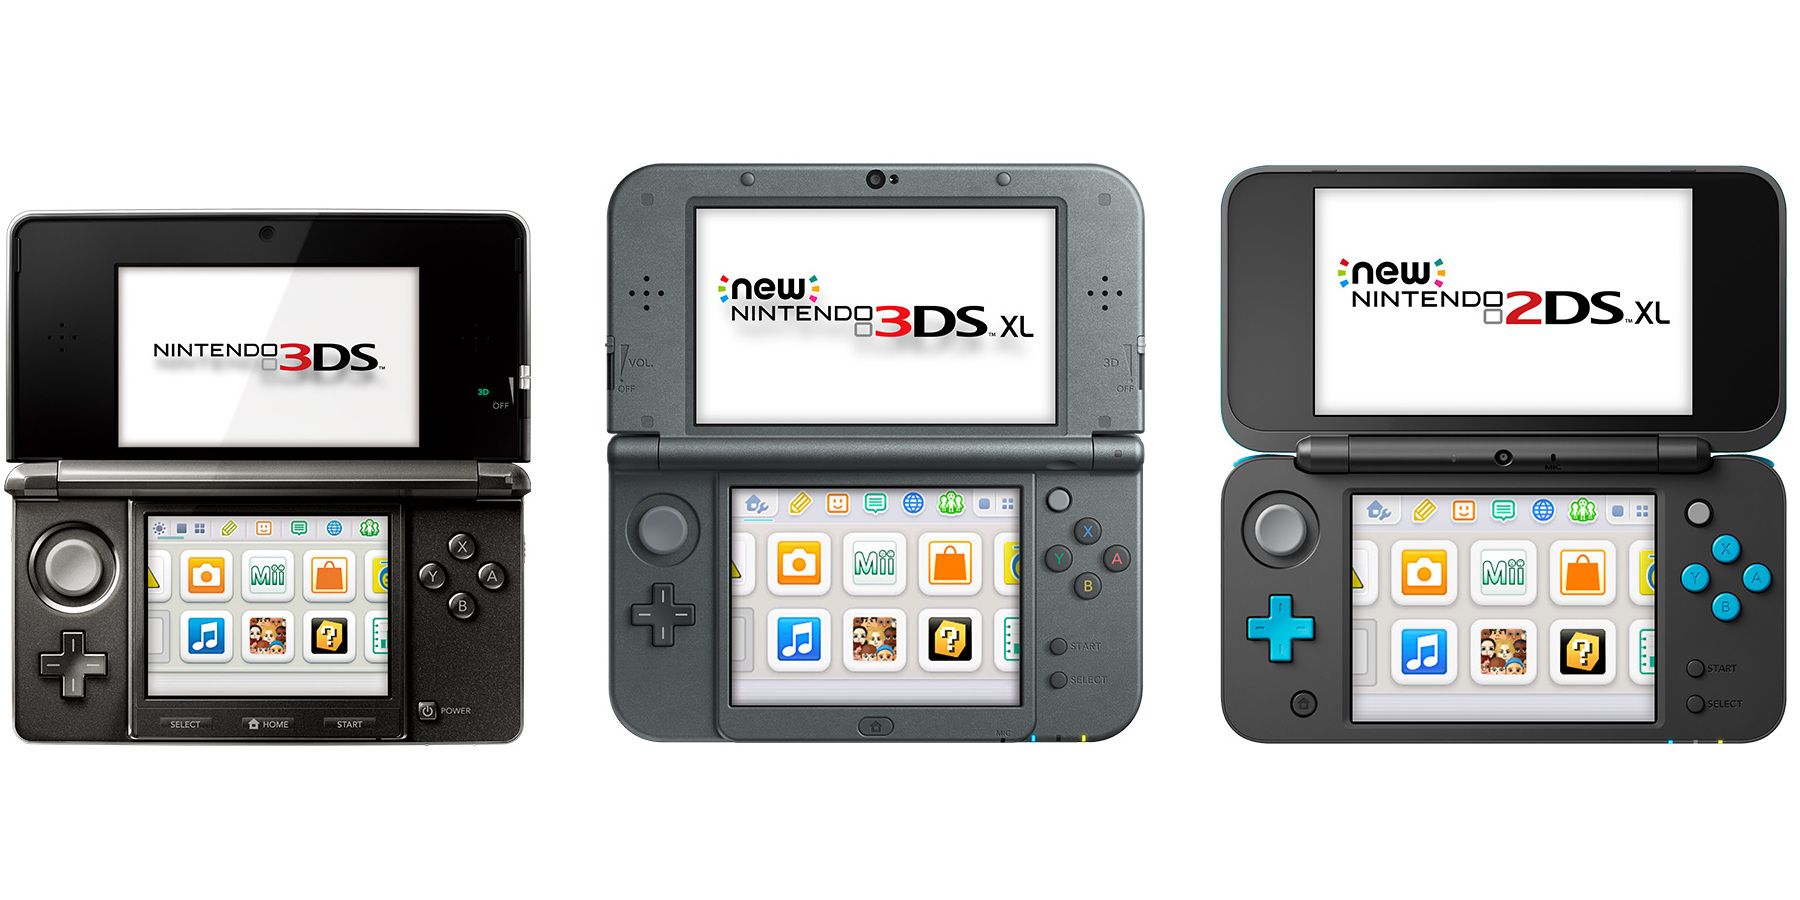 Nintendo Seems to Be Reprinting 3DS Games Even Though Handheld Discontinued